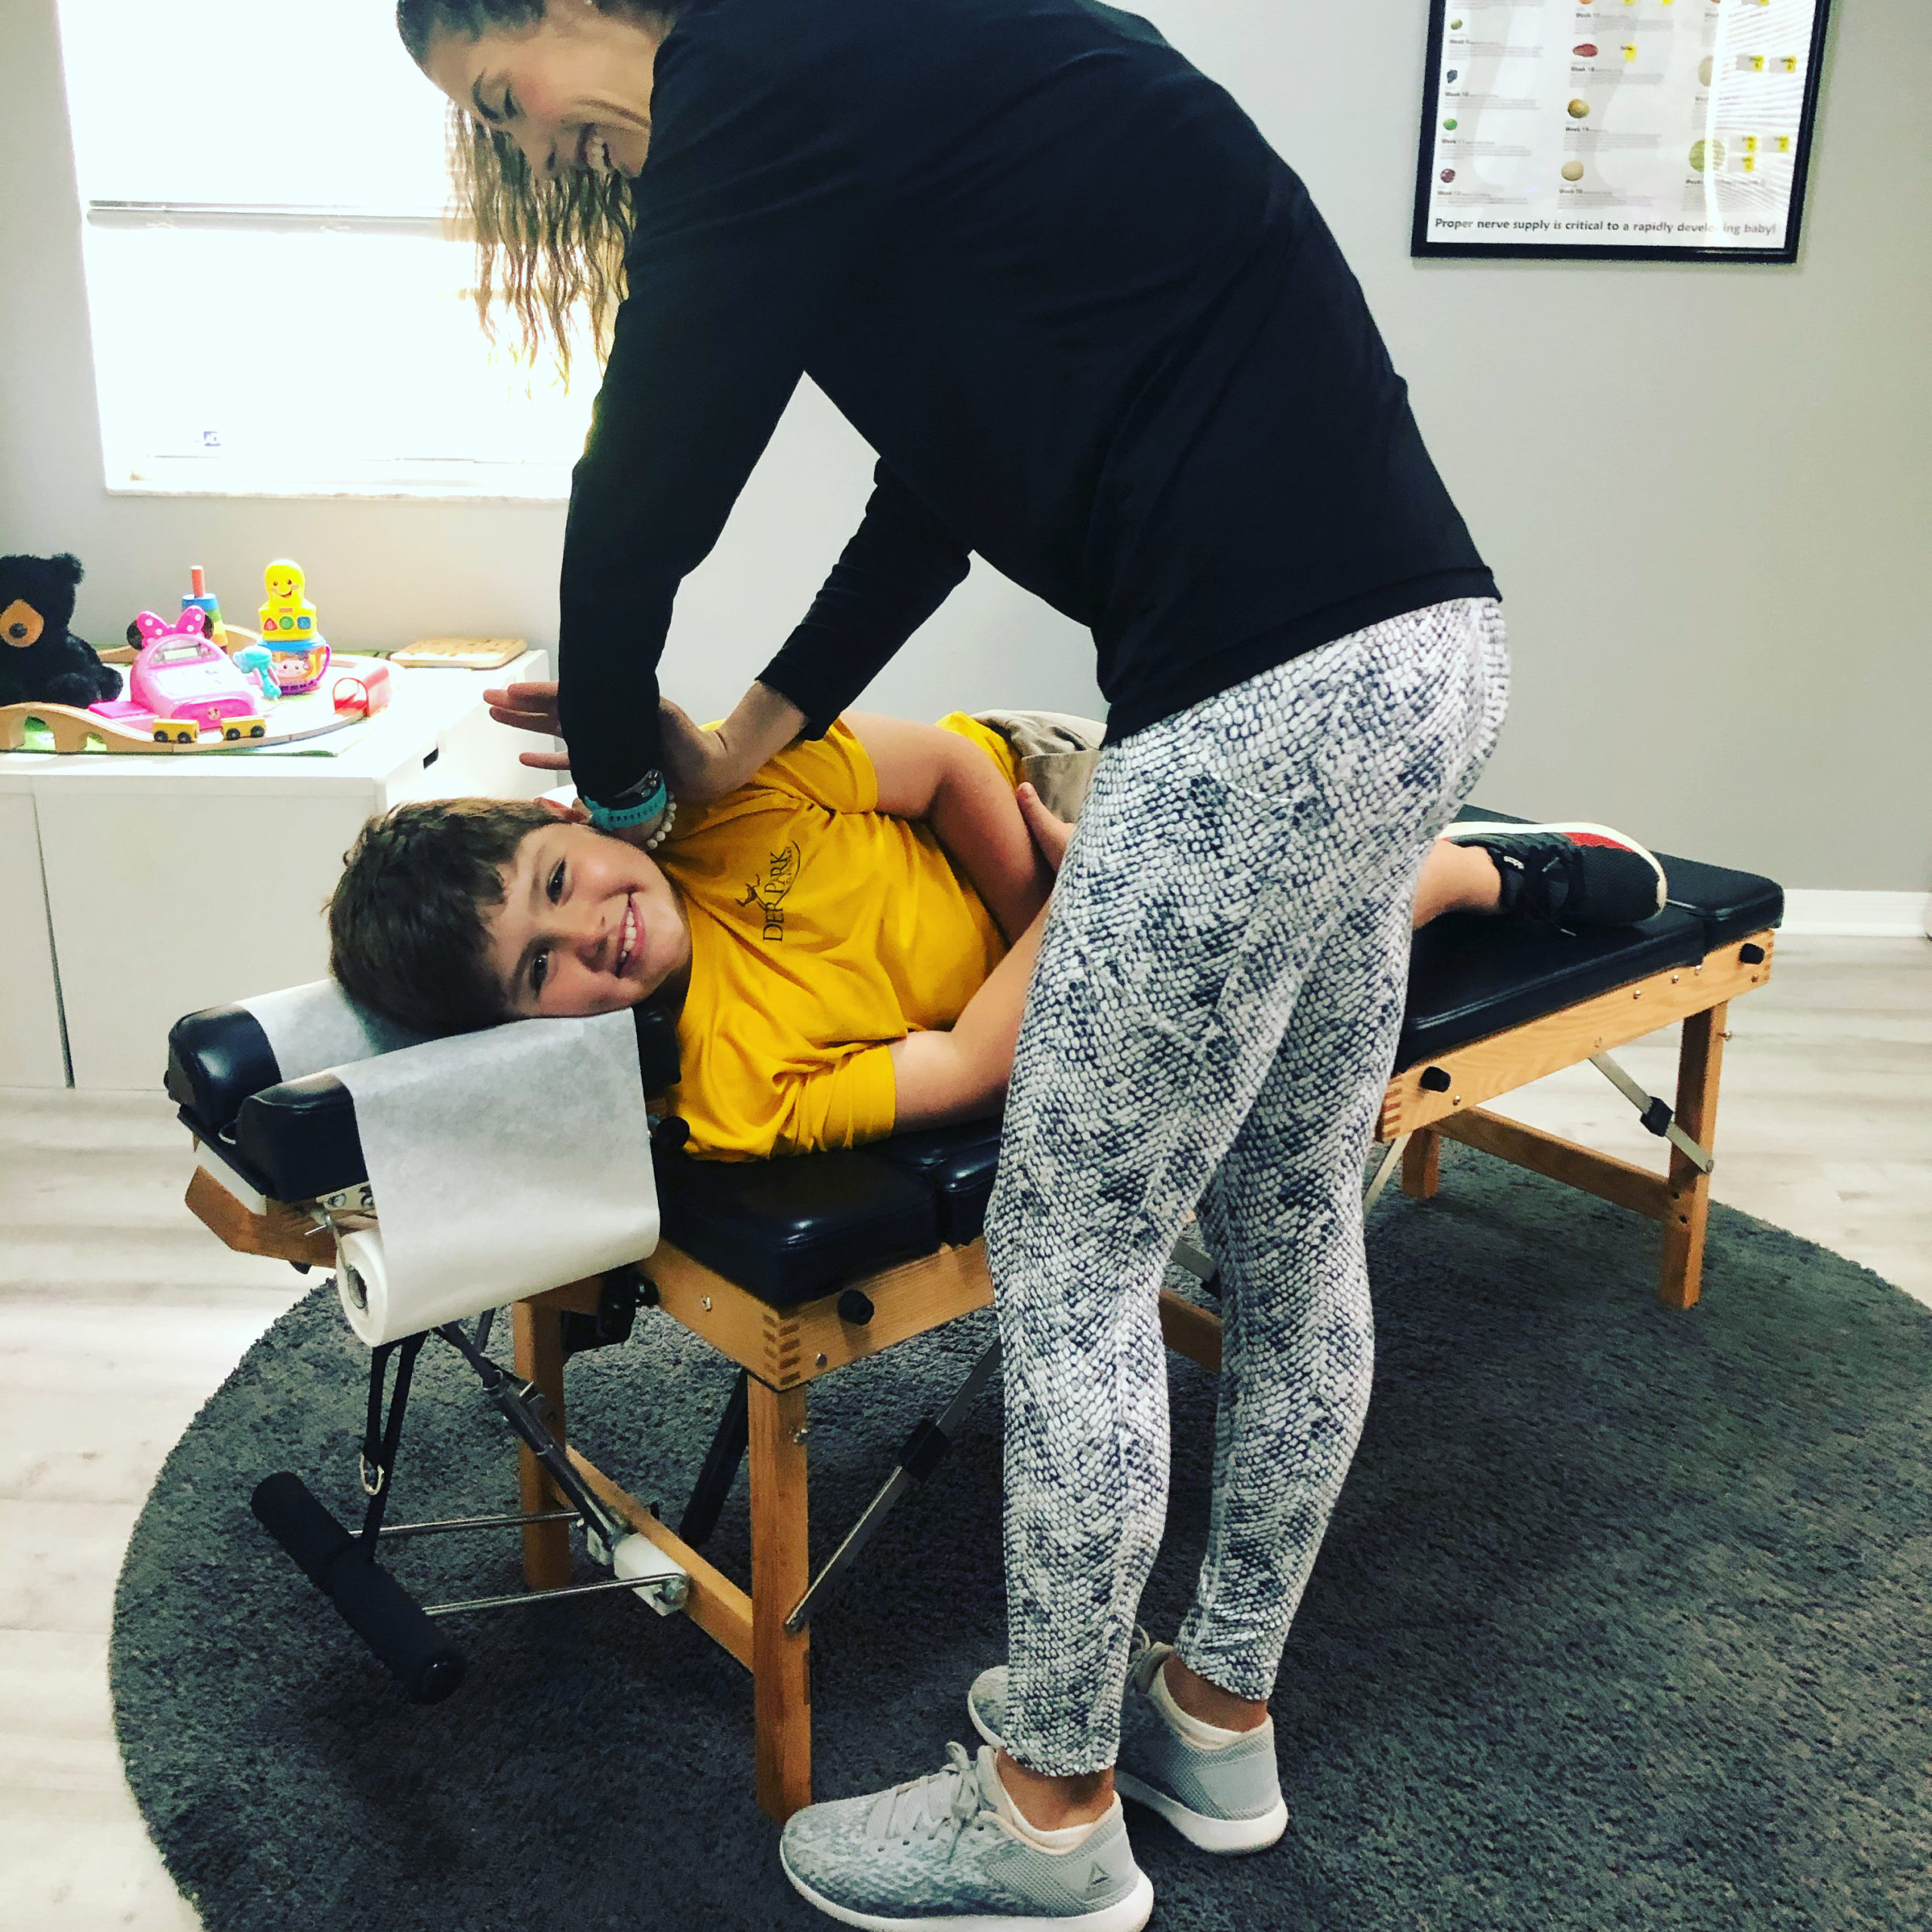 All smiles during a pediatric chiropractic adjustment